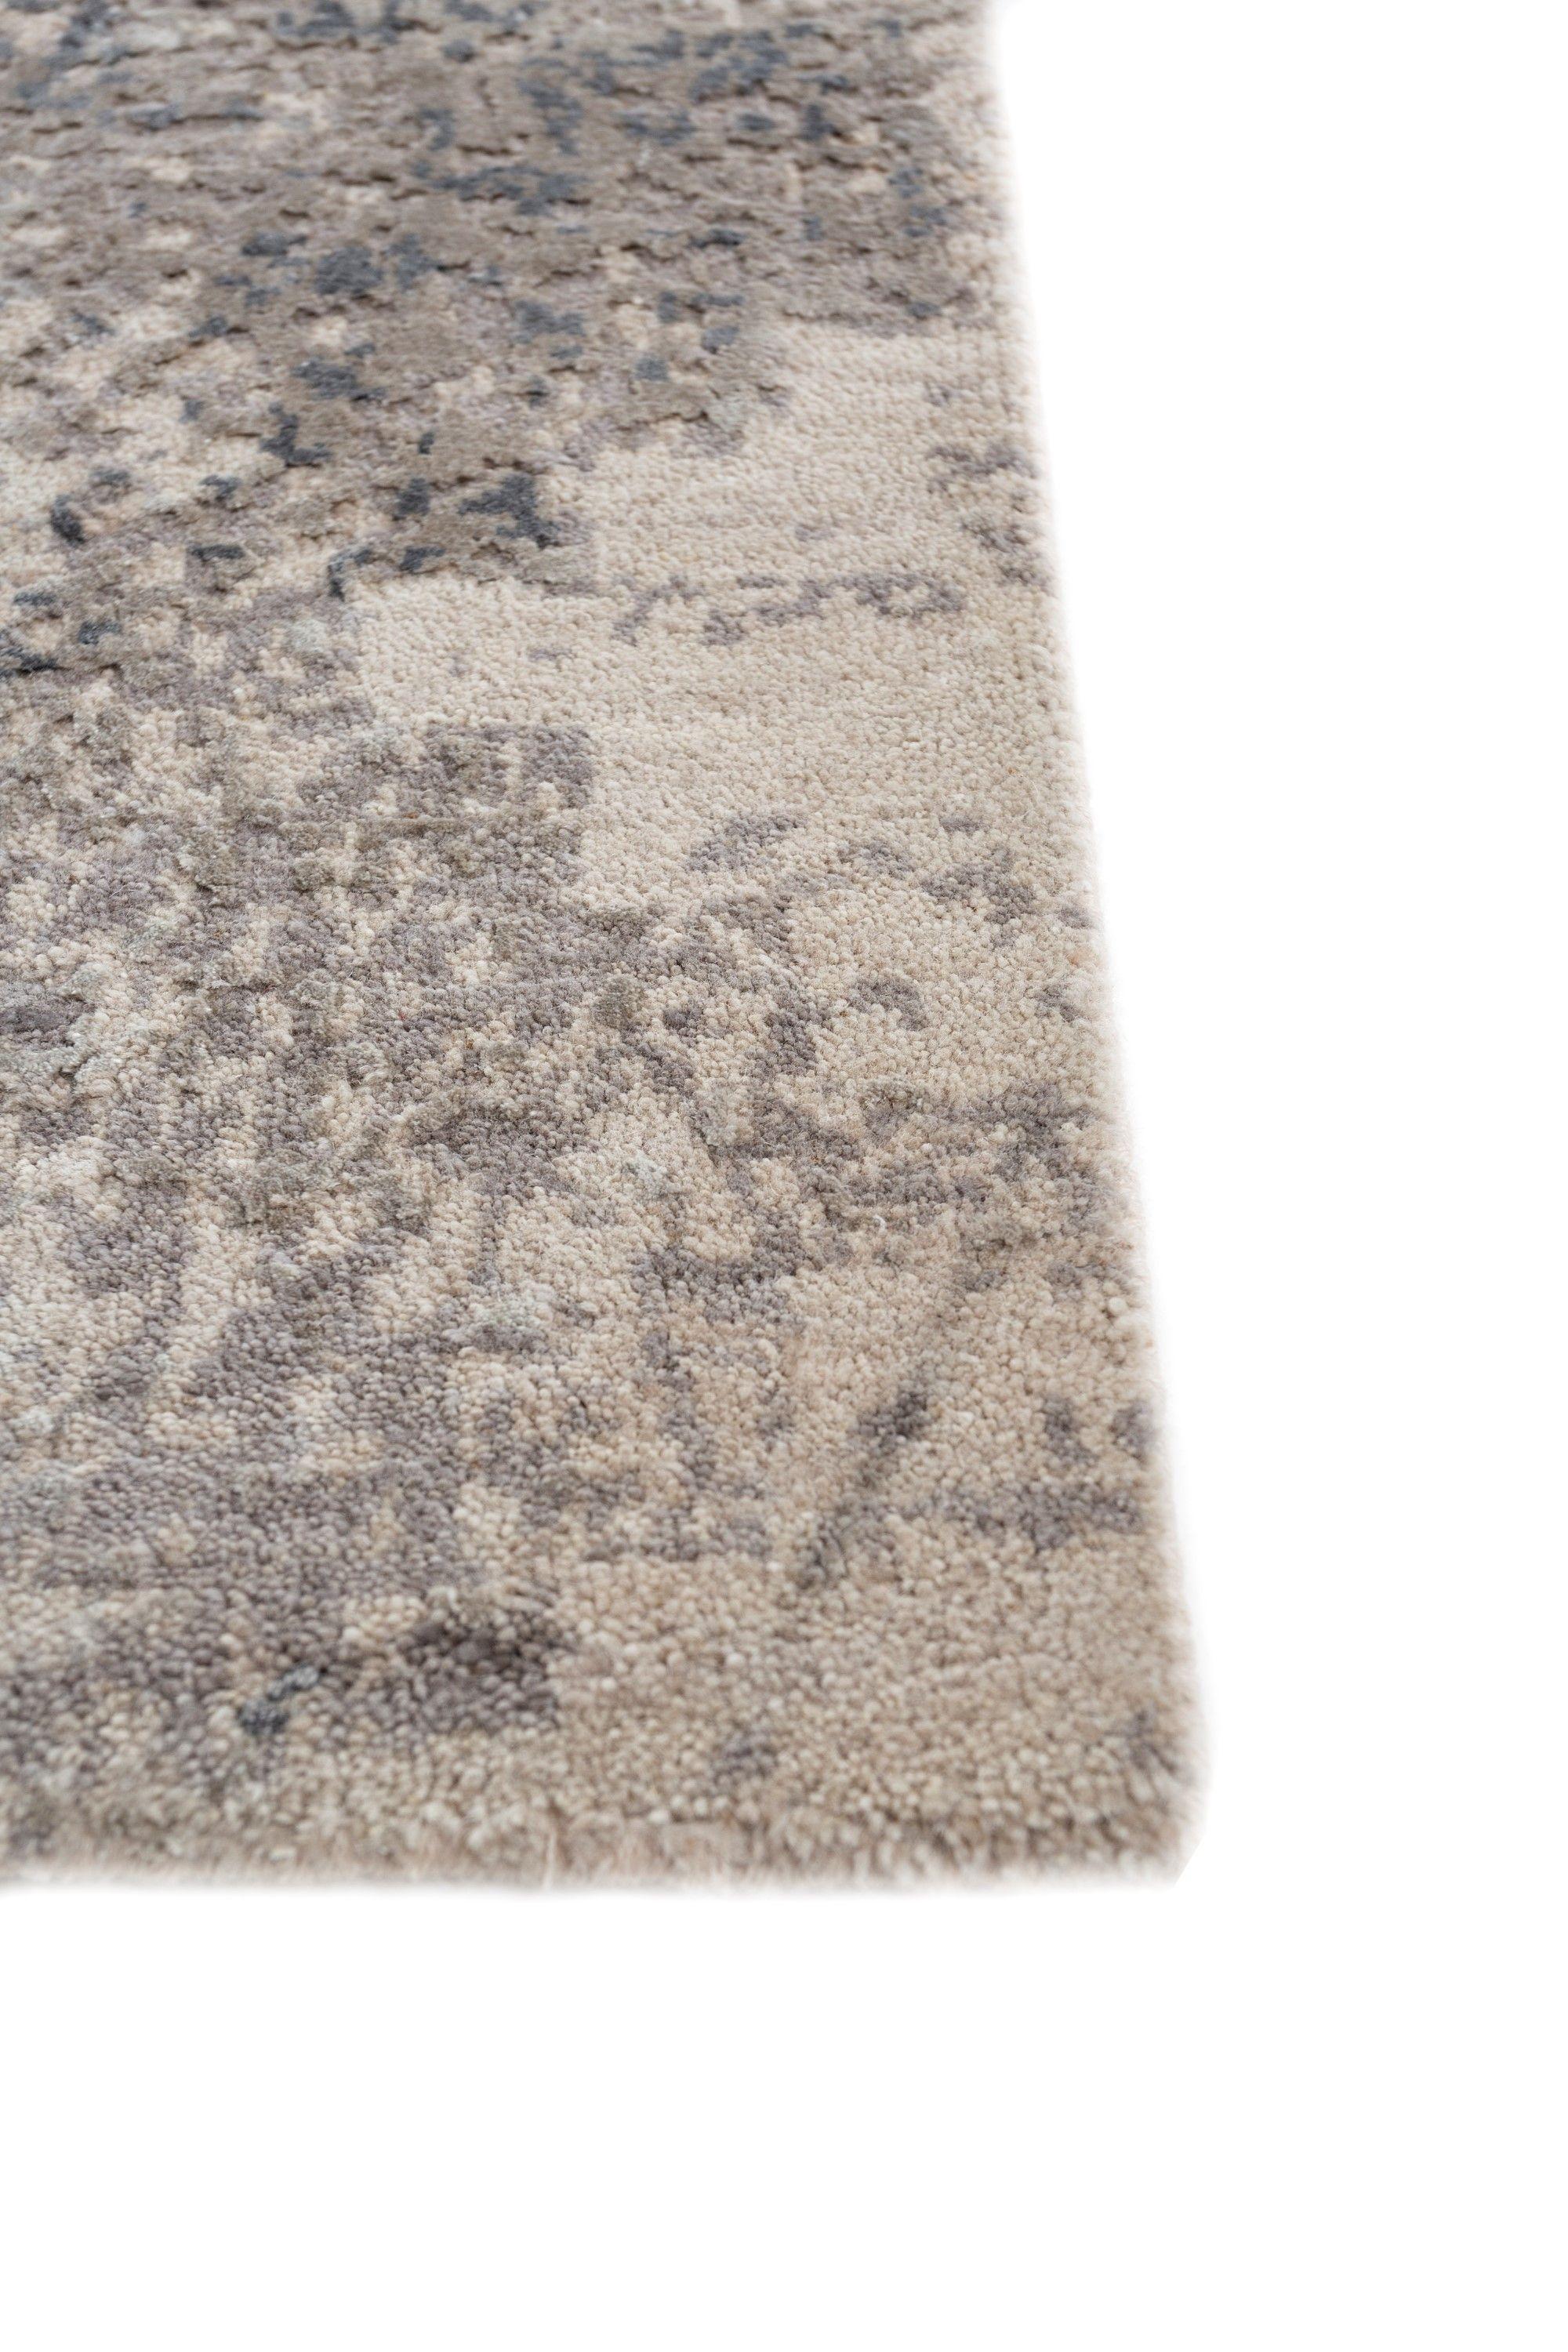 This modern masterpiece is a testament to the beauty found in errors, exploring the intersection of nature's organic interruptions and mechanical misprints. A harmonious blend of spontaneity and uniqueness, this rug is a true work of art. The design